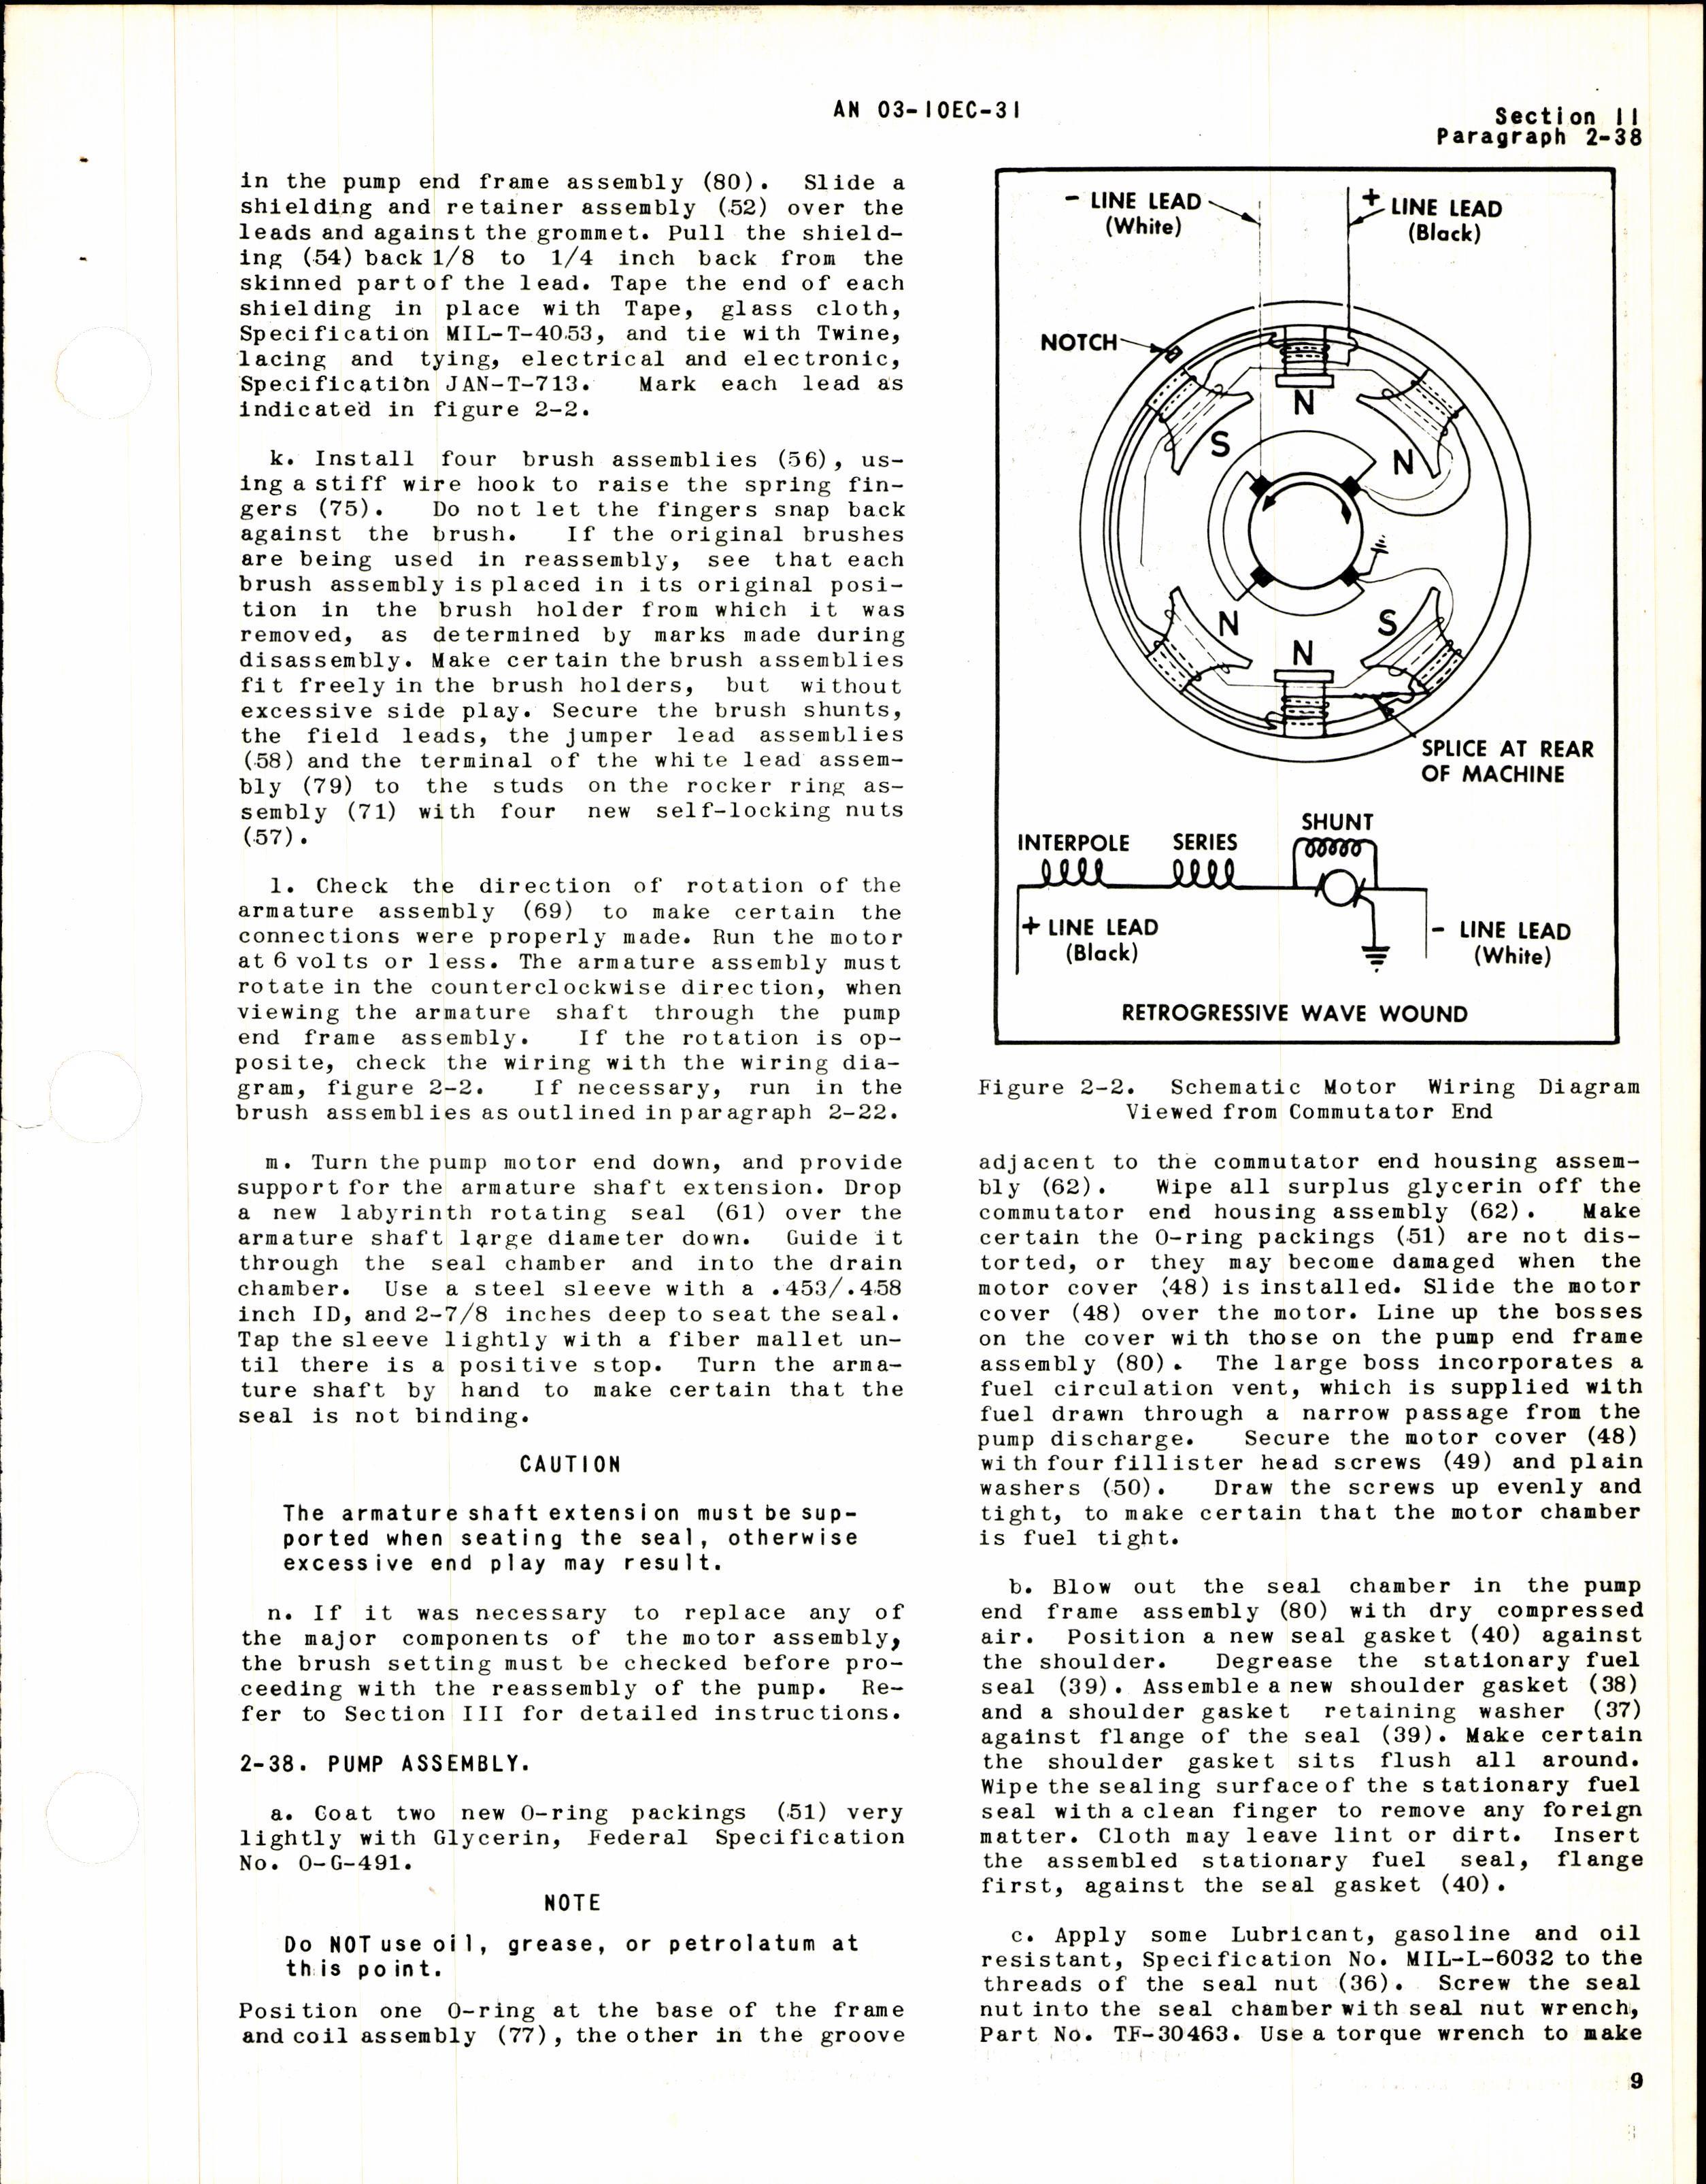 Sample page 11 from AirCorps Library document: Overhaul Instructions for Submerged Fuel Booster Pumps